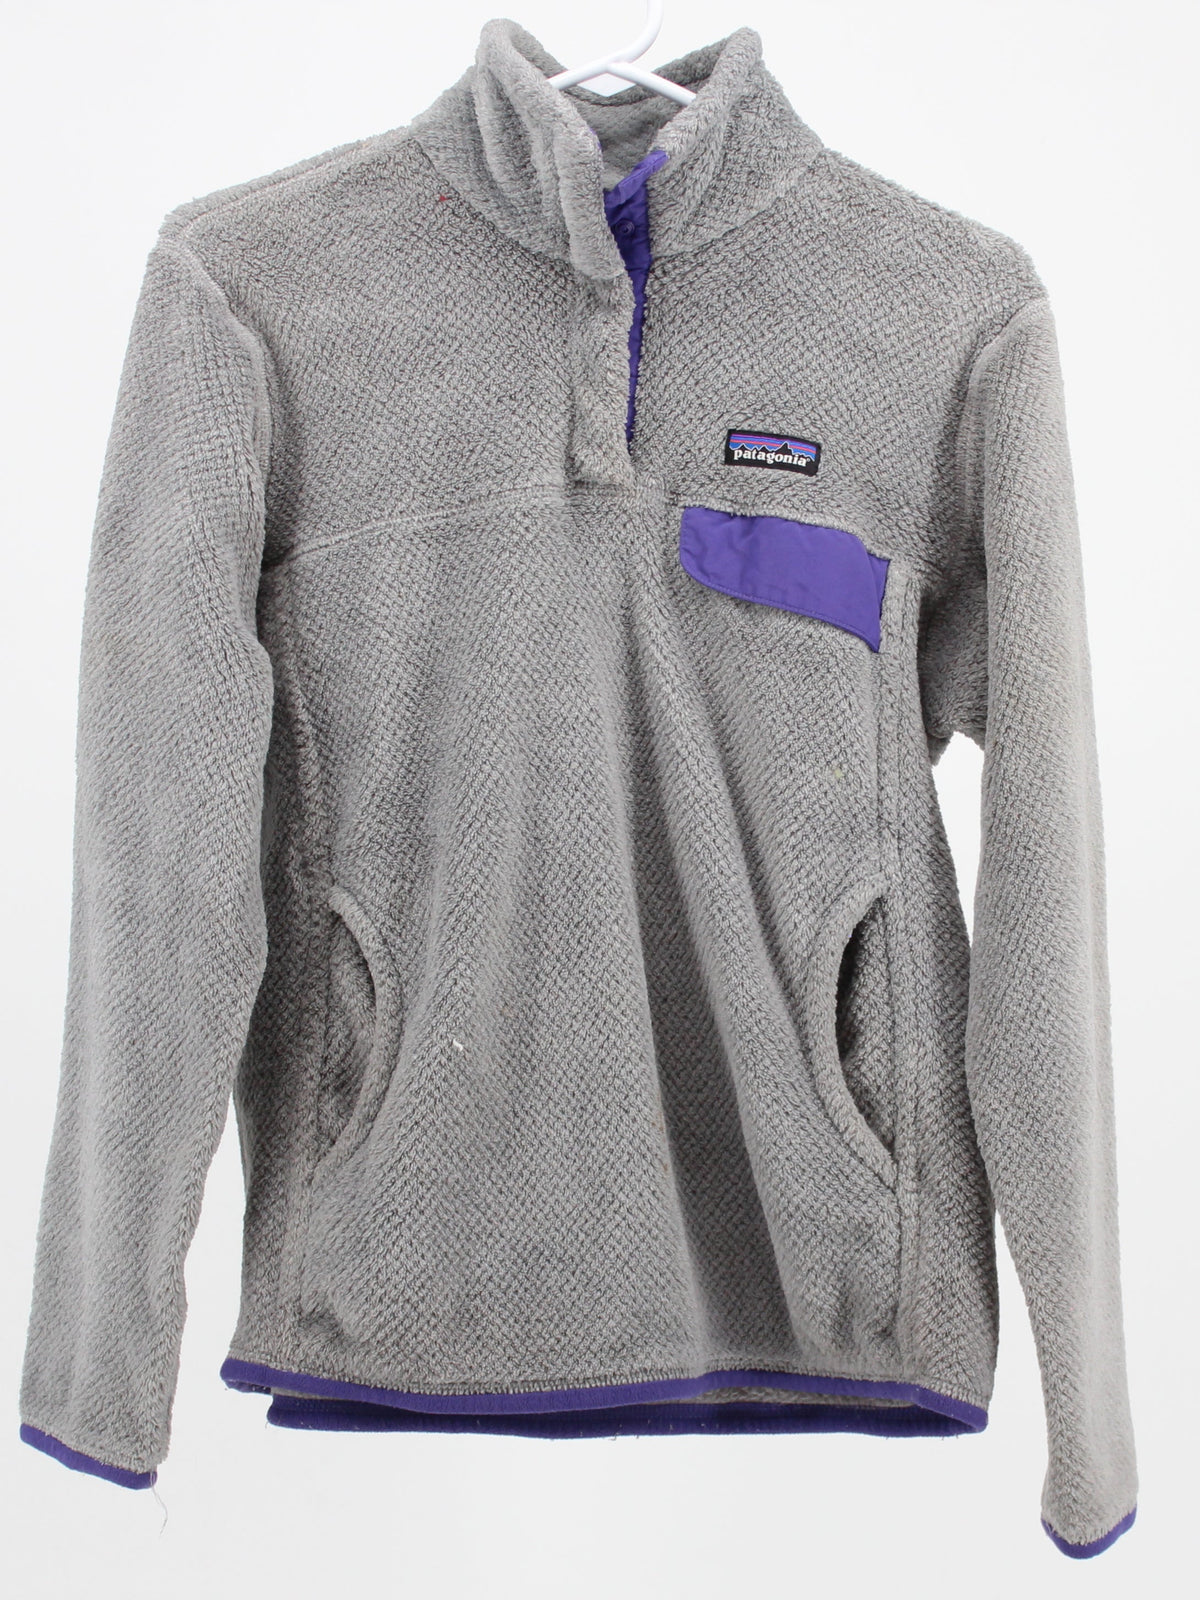 Patagonia Grey Fleece pullover with purple piping